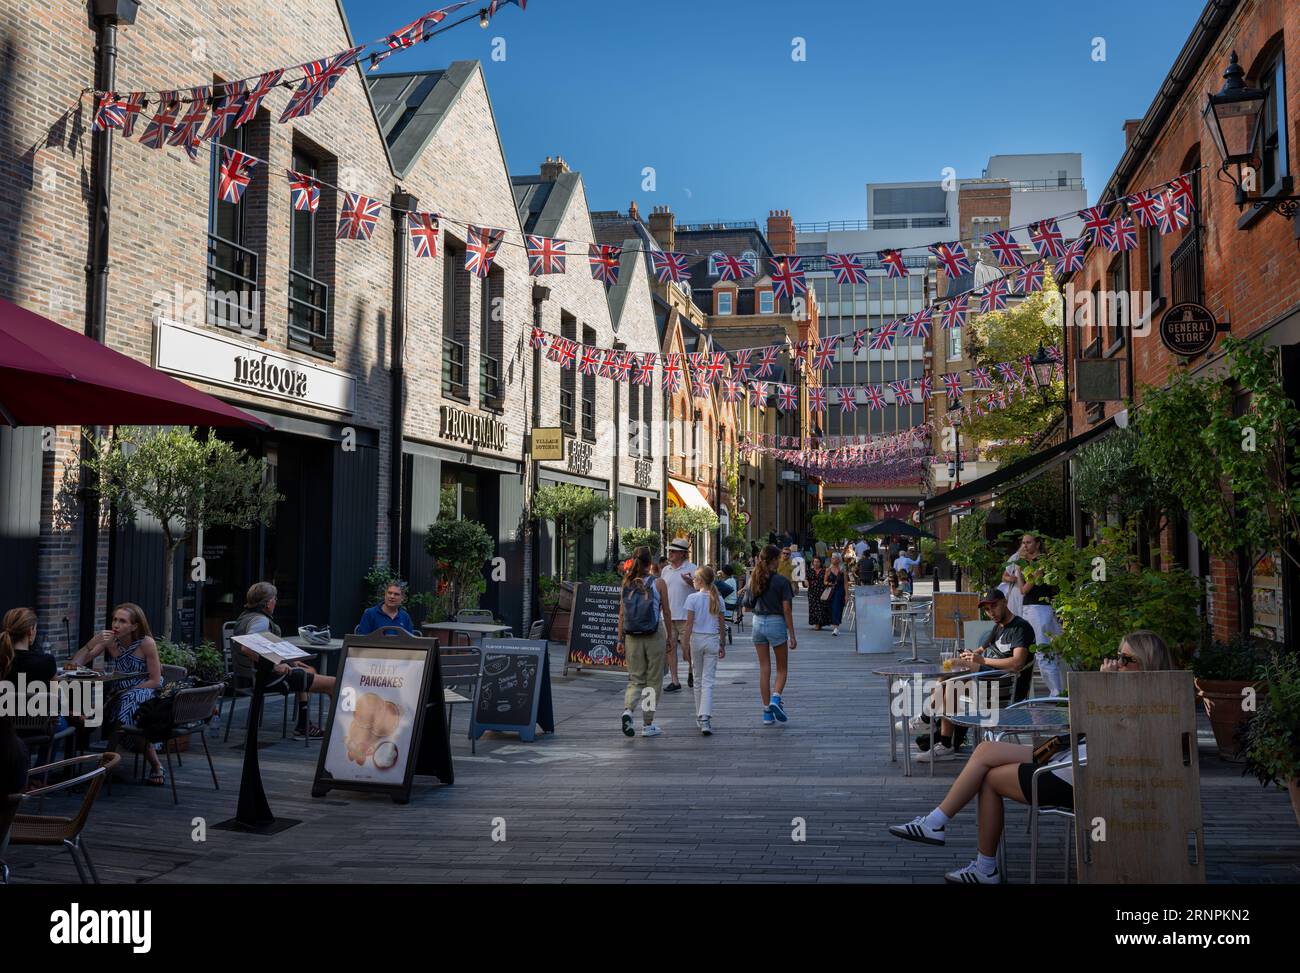 London, UK: Pavilion Road near Sloane Square in Chelsea, London. A pedestrian street with people enjoying the shops, cafes and restaurants. Stock Photo